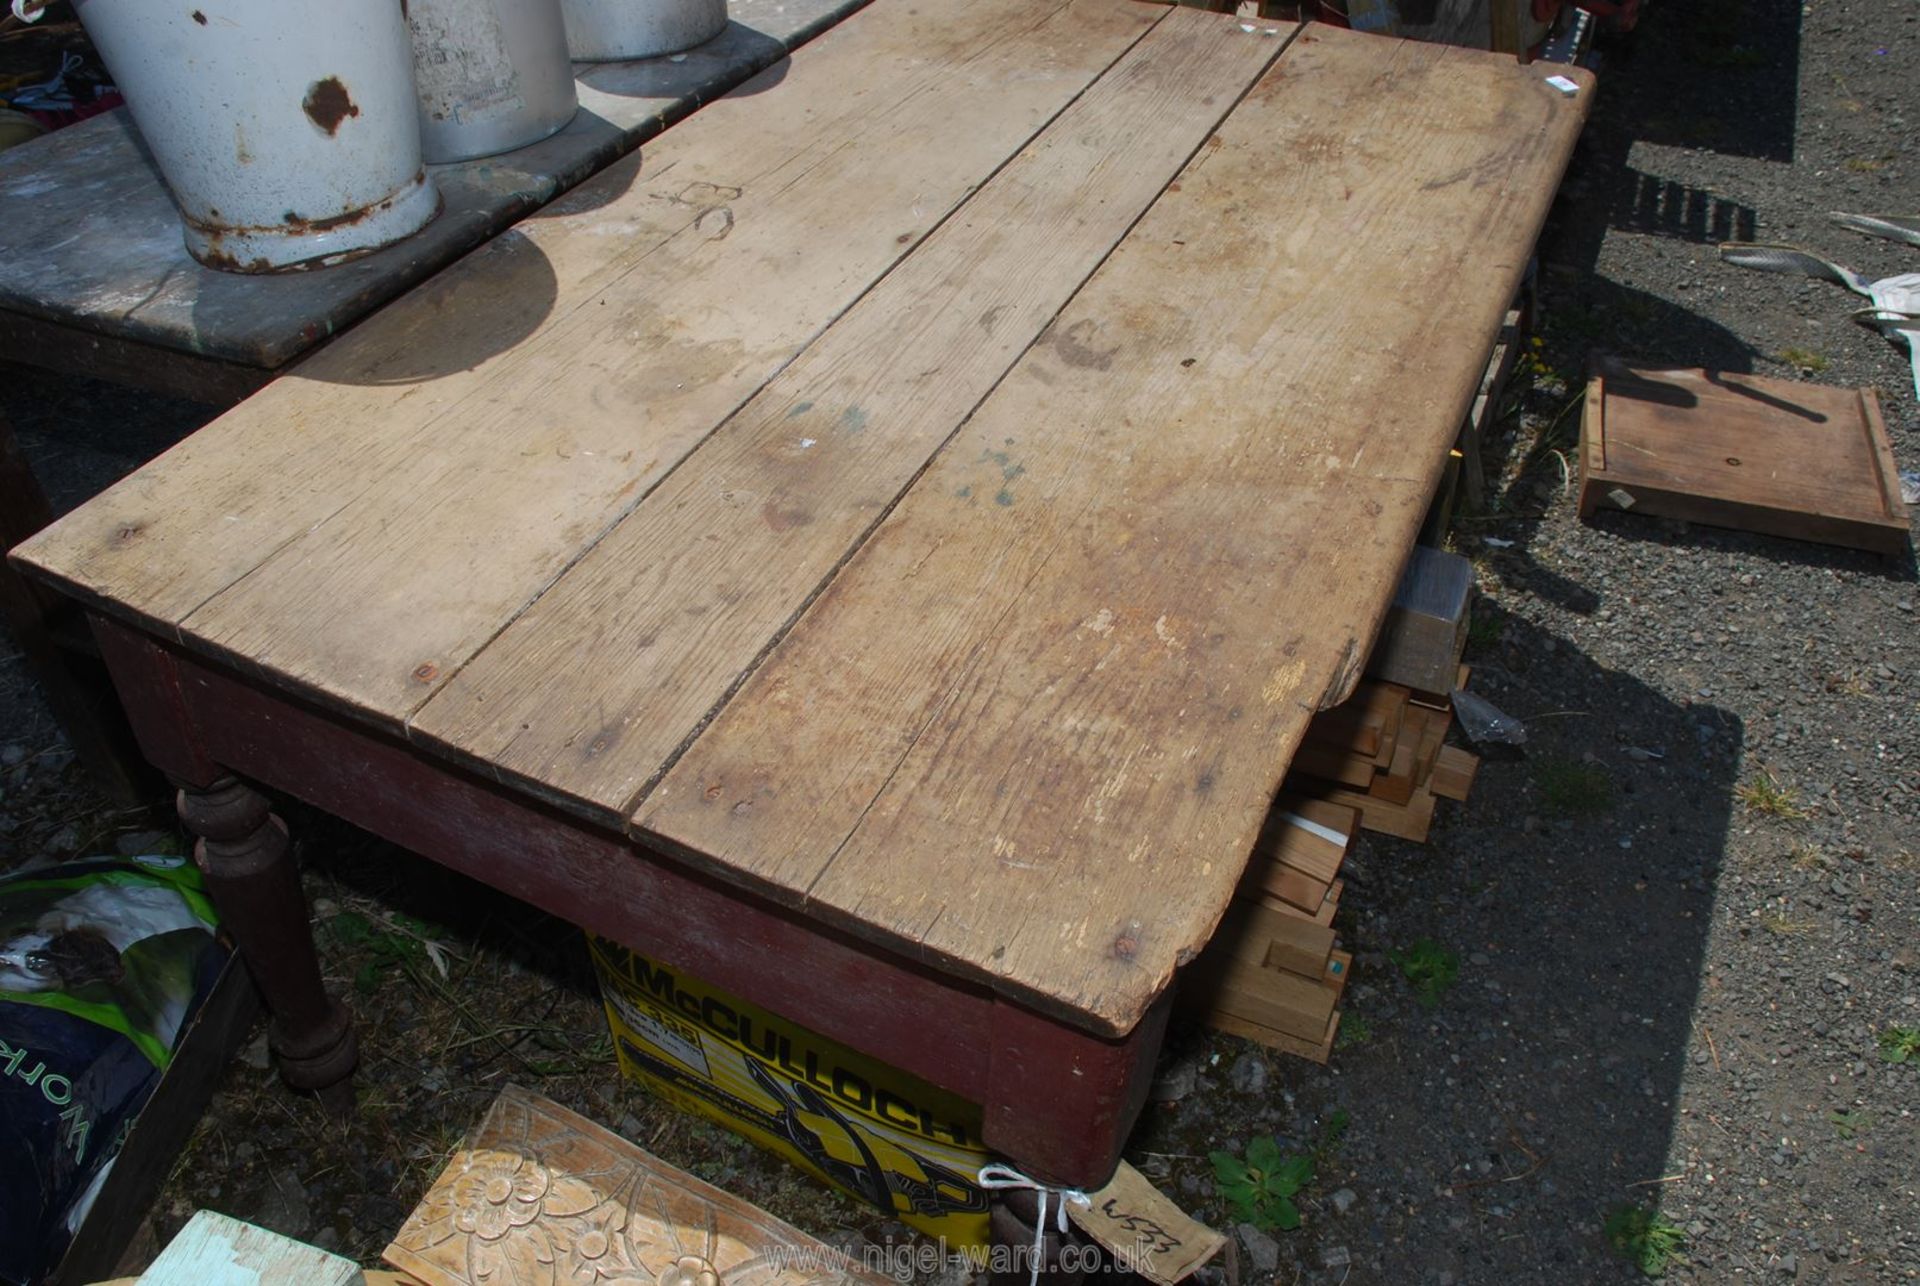 A rustic kitchen table, - Image 2 of 2